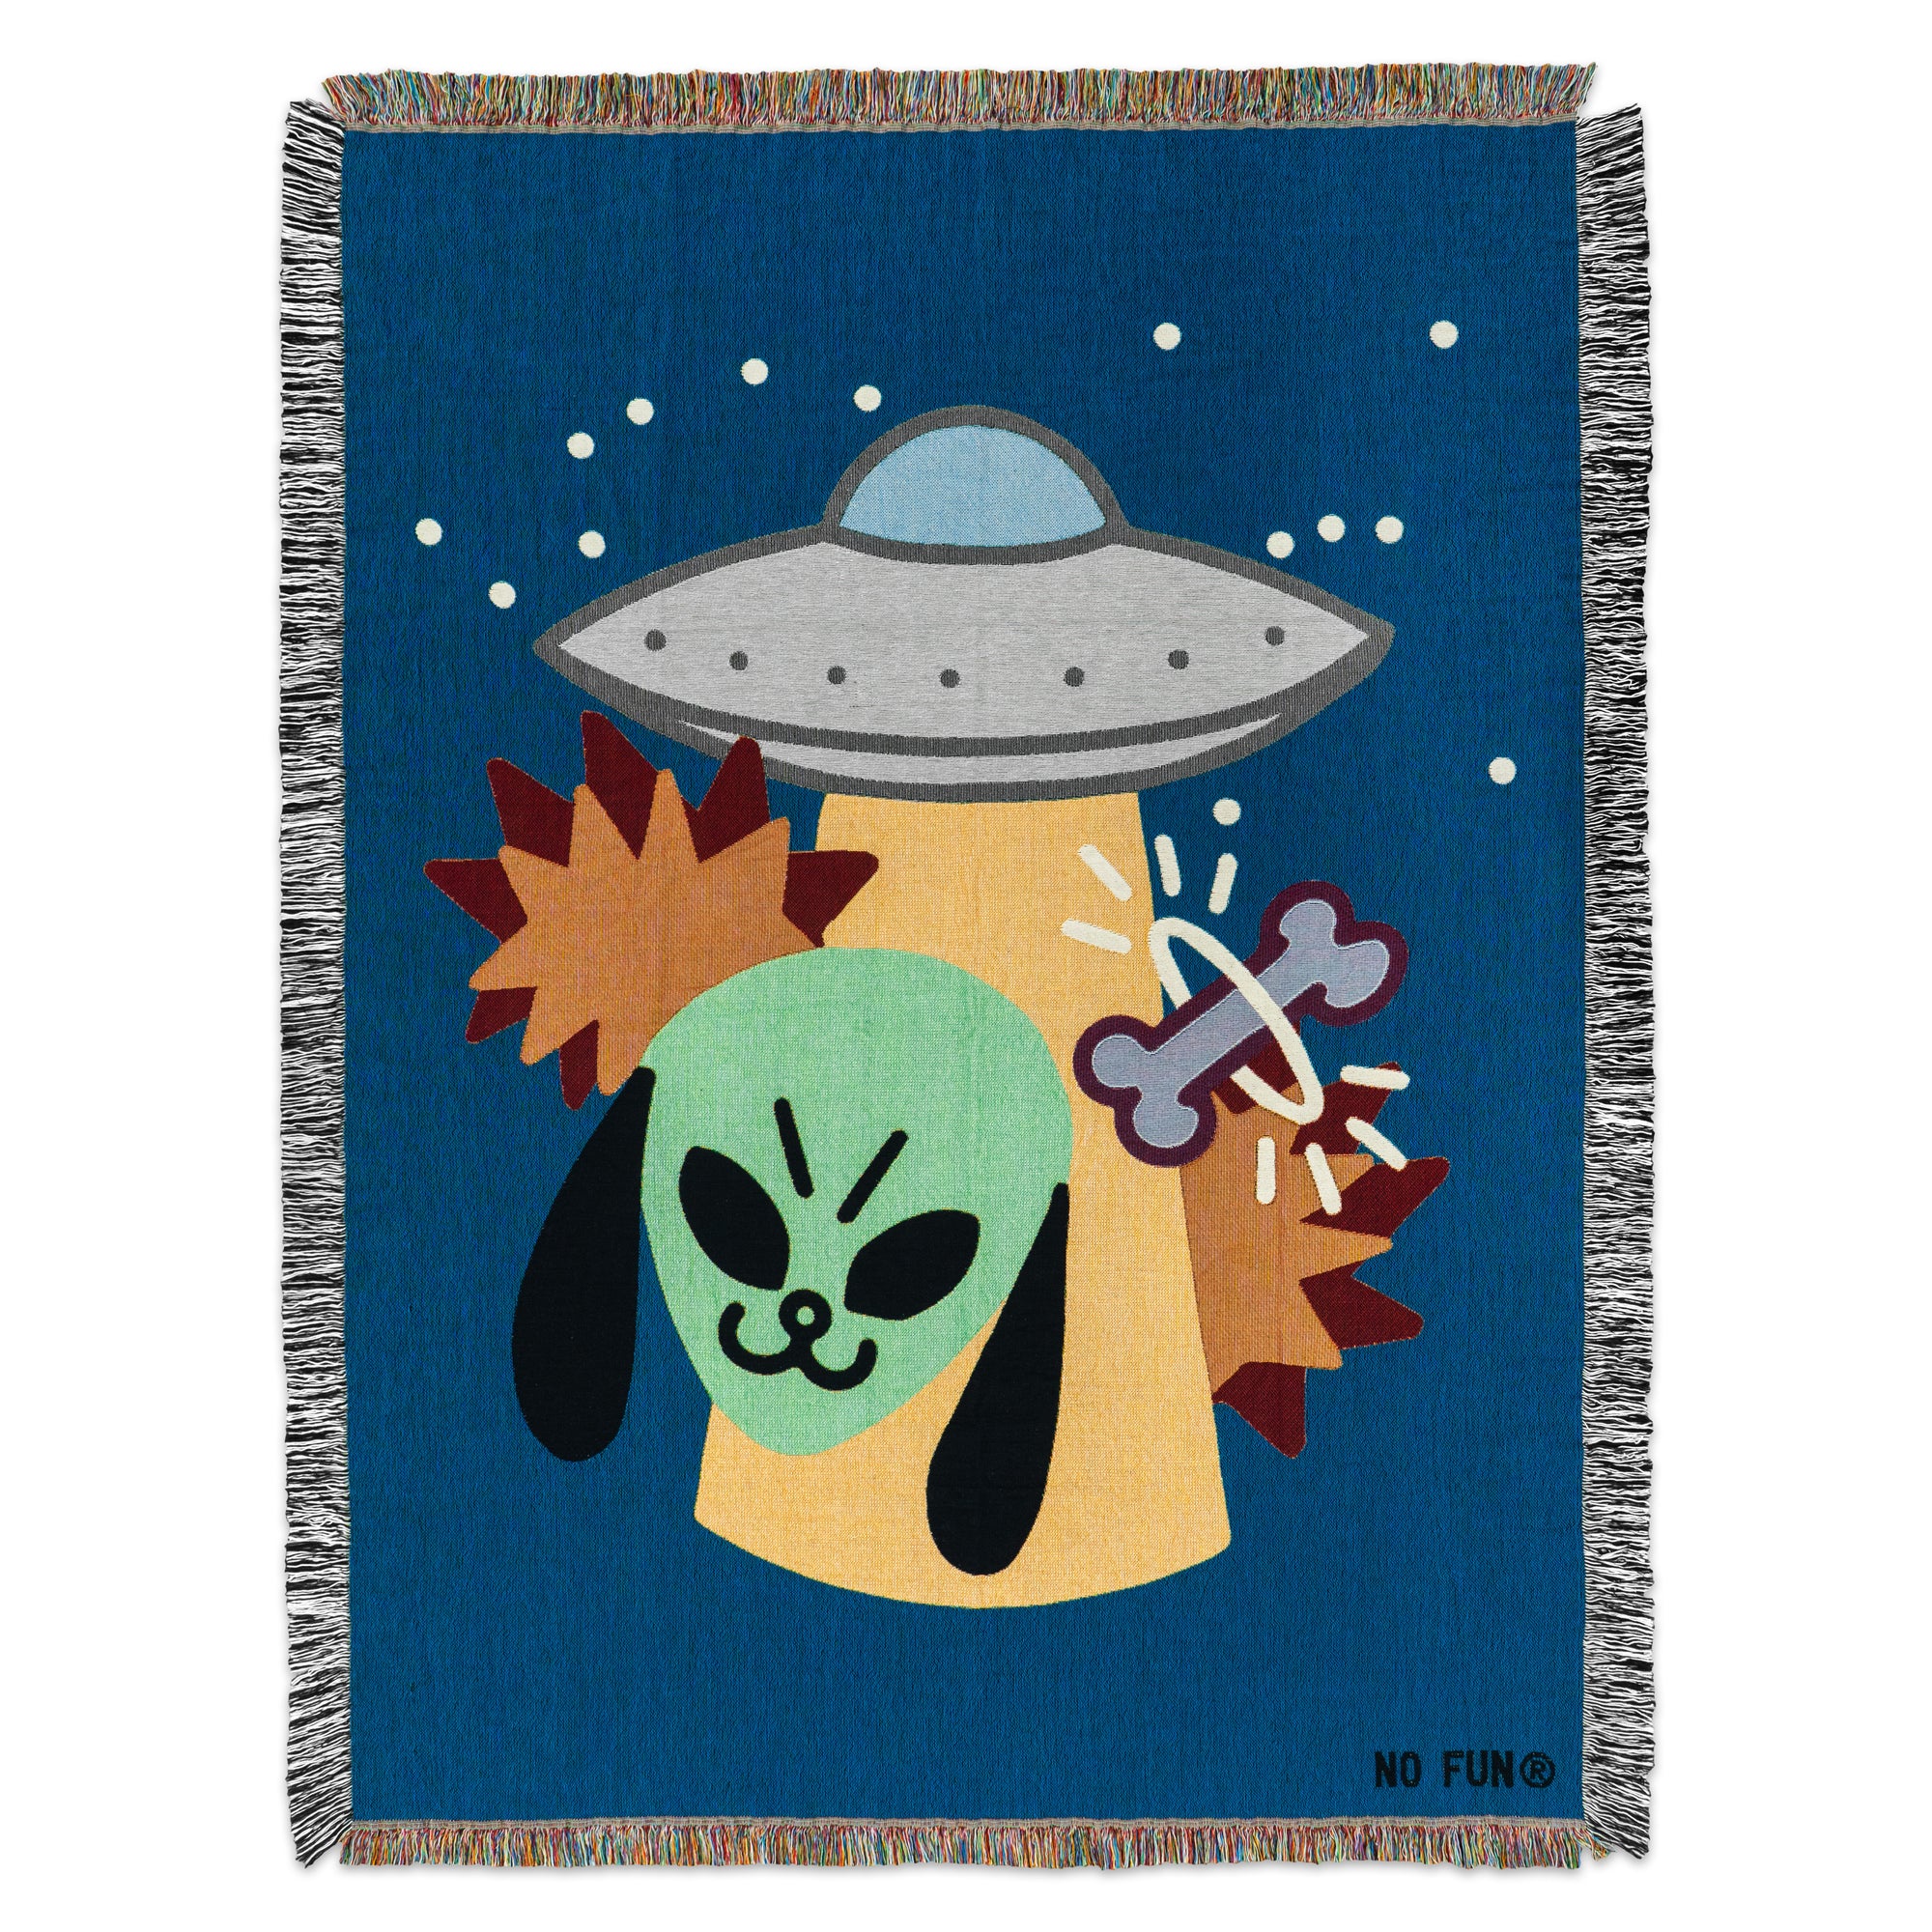 "Space Dog" Woven Blanket